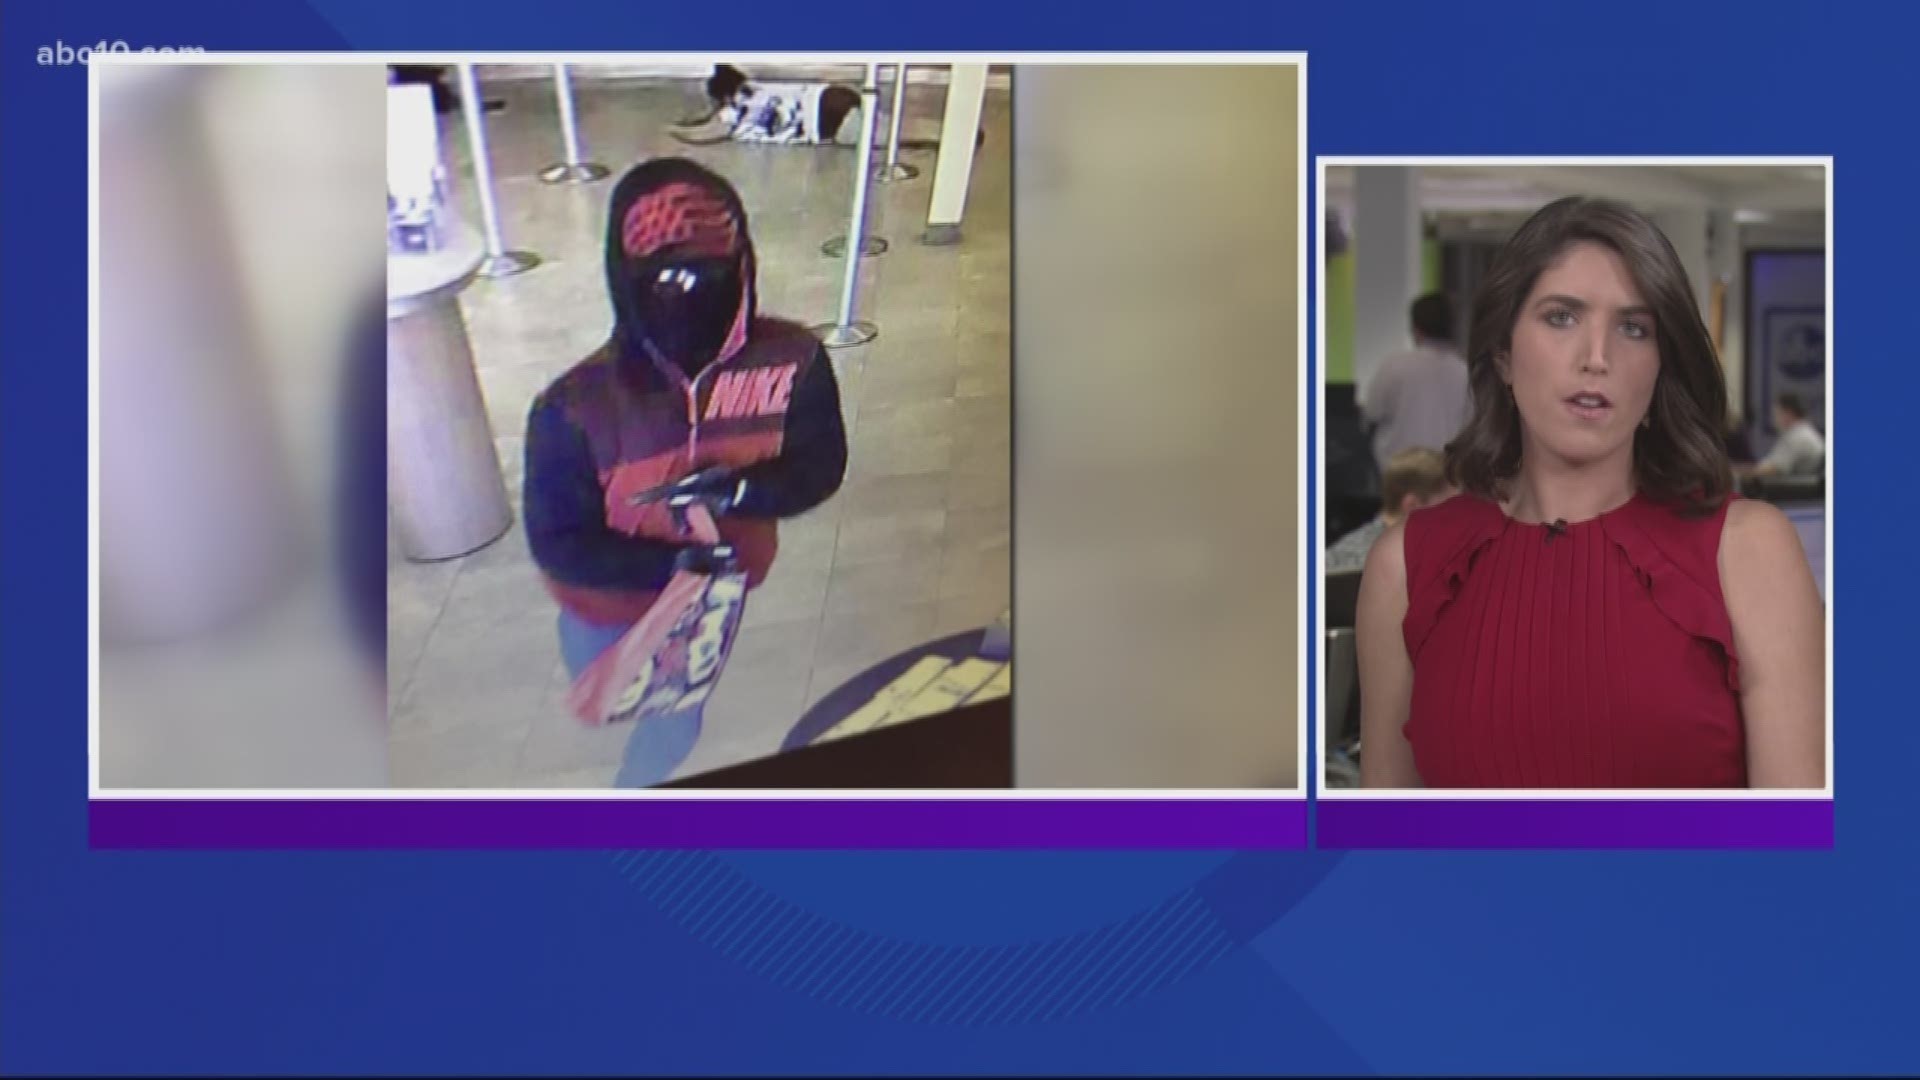 Riverbank Police Services say masked suspects robbed a bank and hit a bicyclist while fleeing the scene in a car Tuesday.